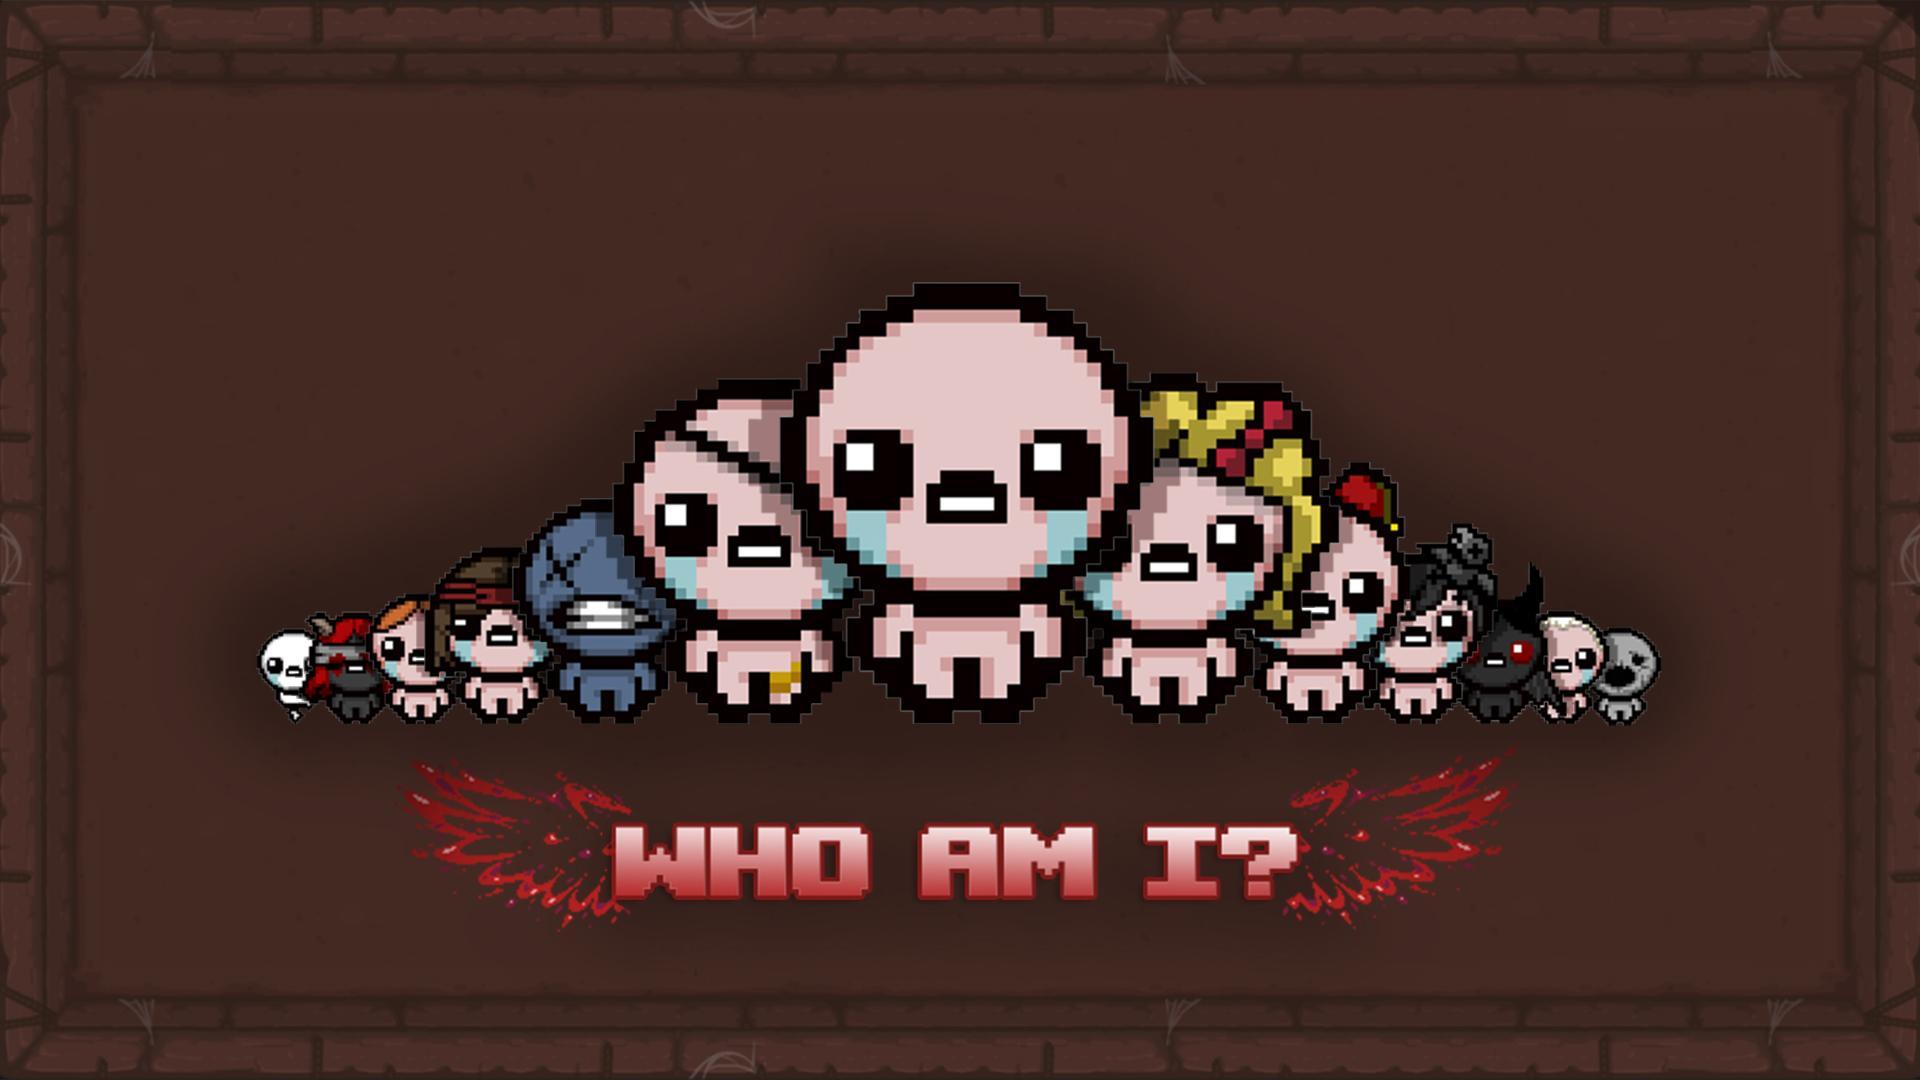 Wallpaper game the game game games eve Isaac The Binding of Isaac  rebirth roguelike Isaac repentance thoi afterbirth images for desktop  section игры  download